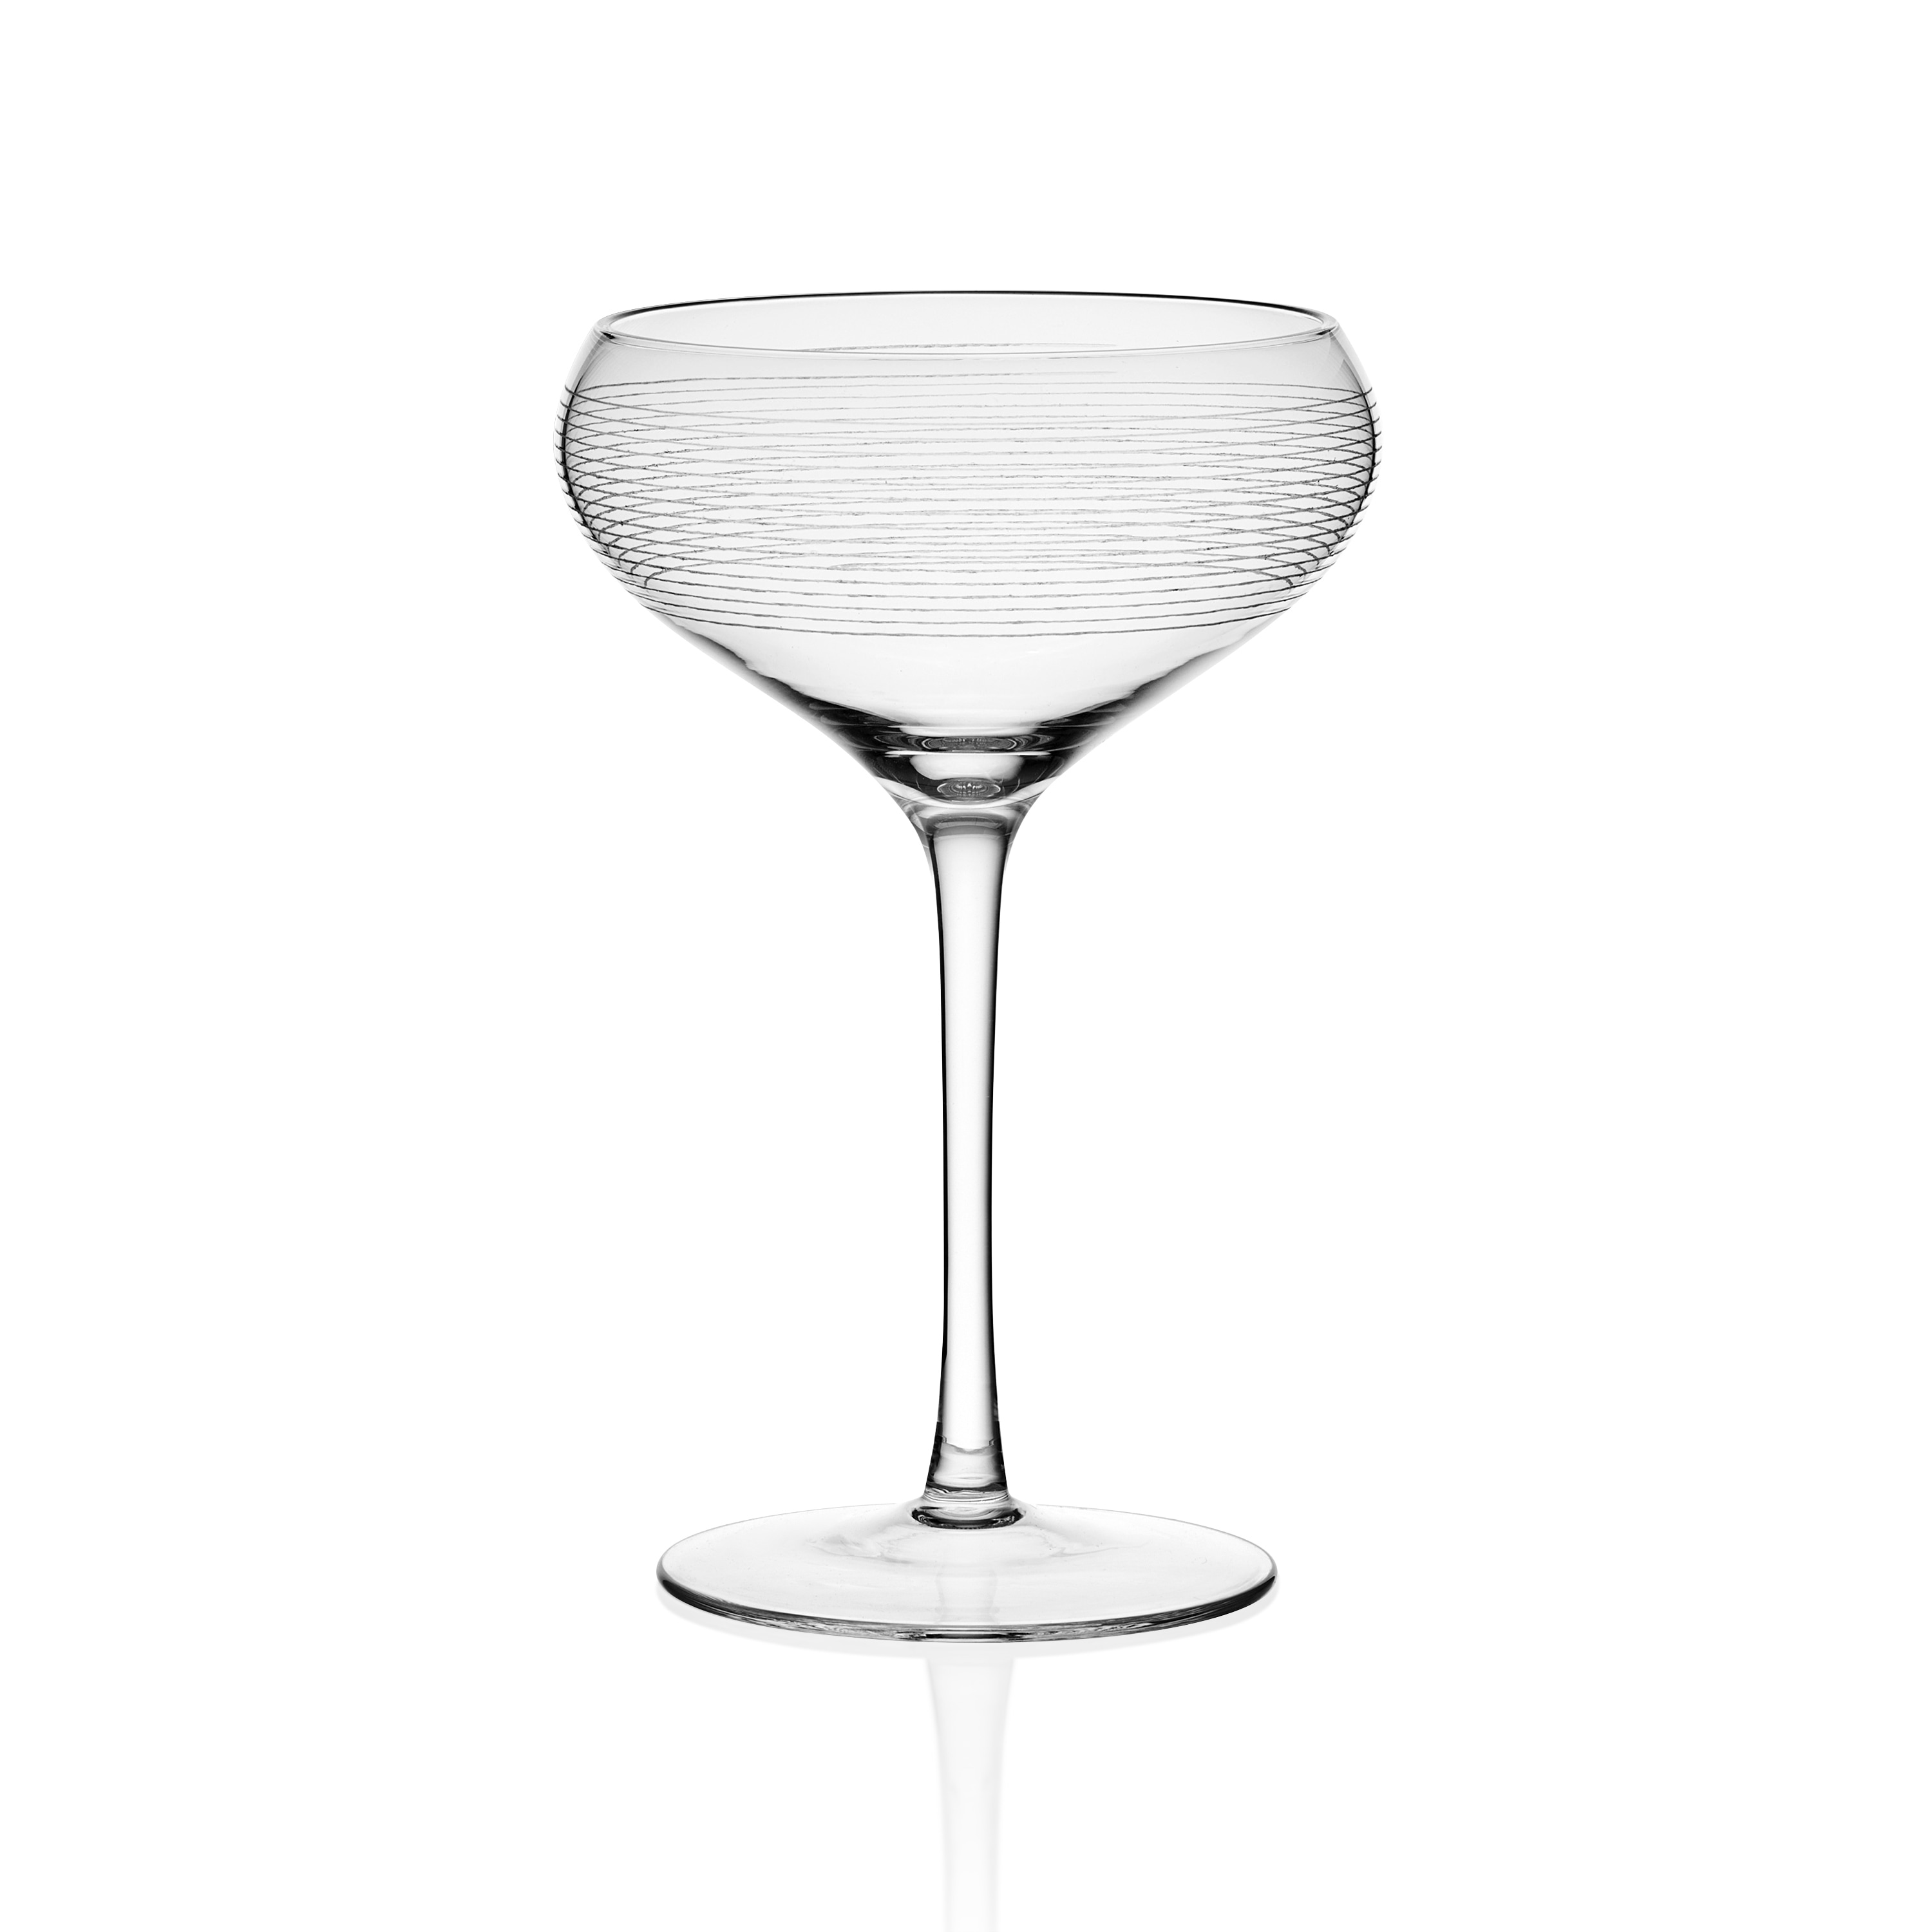 https://ak1.ostkcdn.com/images/products/is/images/direct/1dbb30c80f5bb3d85533ec786ca65e0dbe7568e0/Mikasa-Cheers-15OZ-Coupe-Cocktail-Glass%2C-Set-of-4.jpg